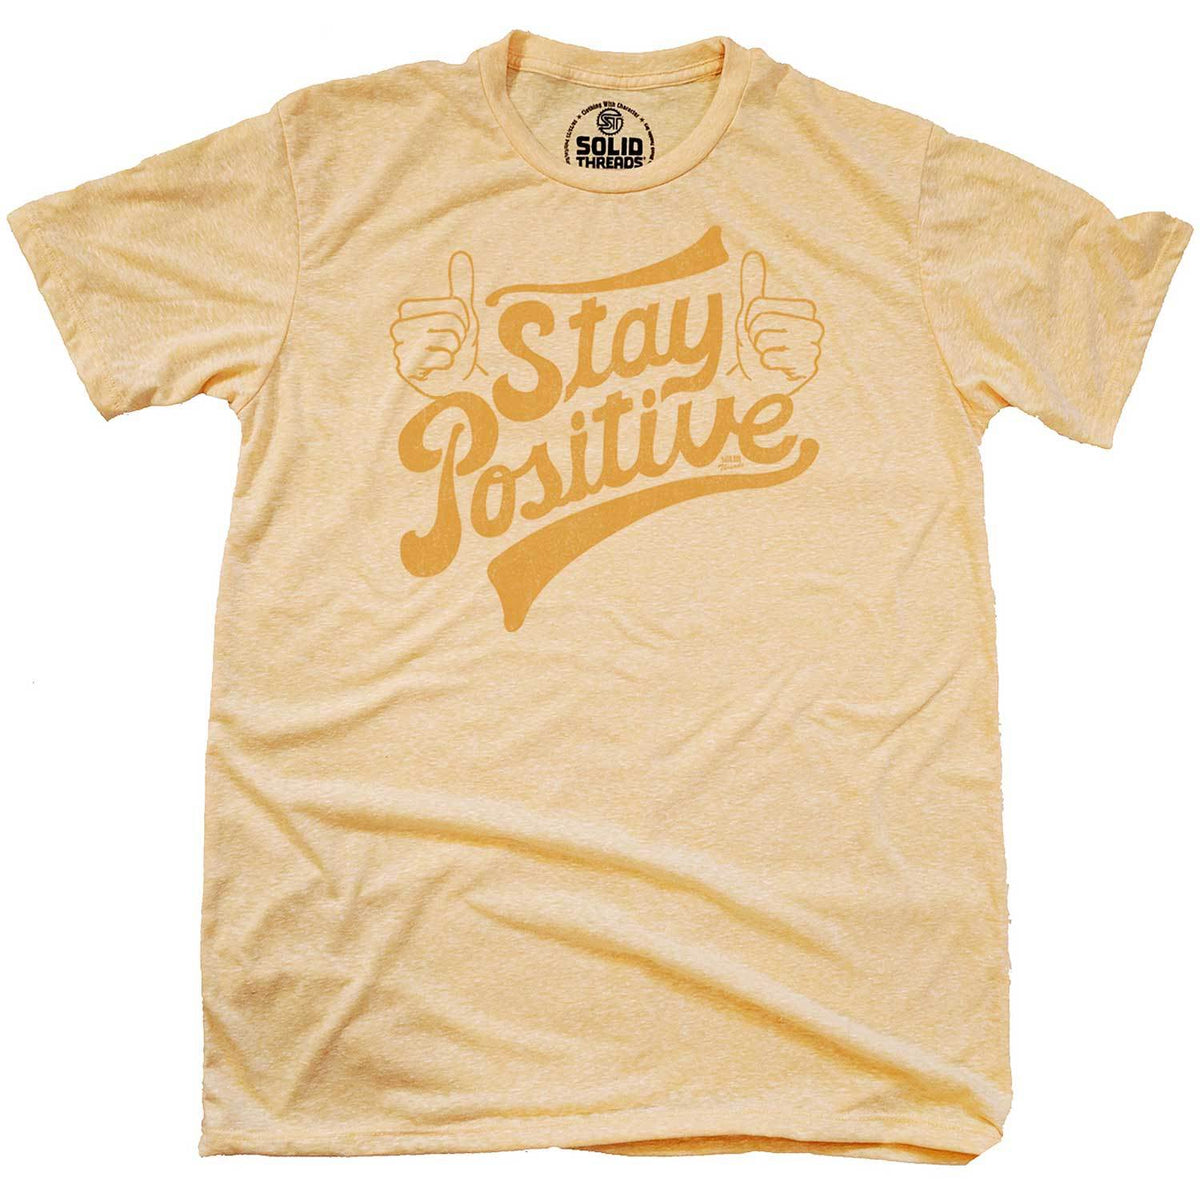 Men&#39;s Stay Positive Cool Graphic T-Shirt | Retro Wholesome Happiness Tee | Solid Threads